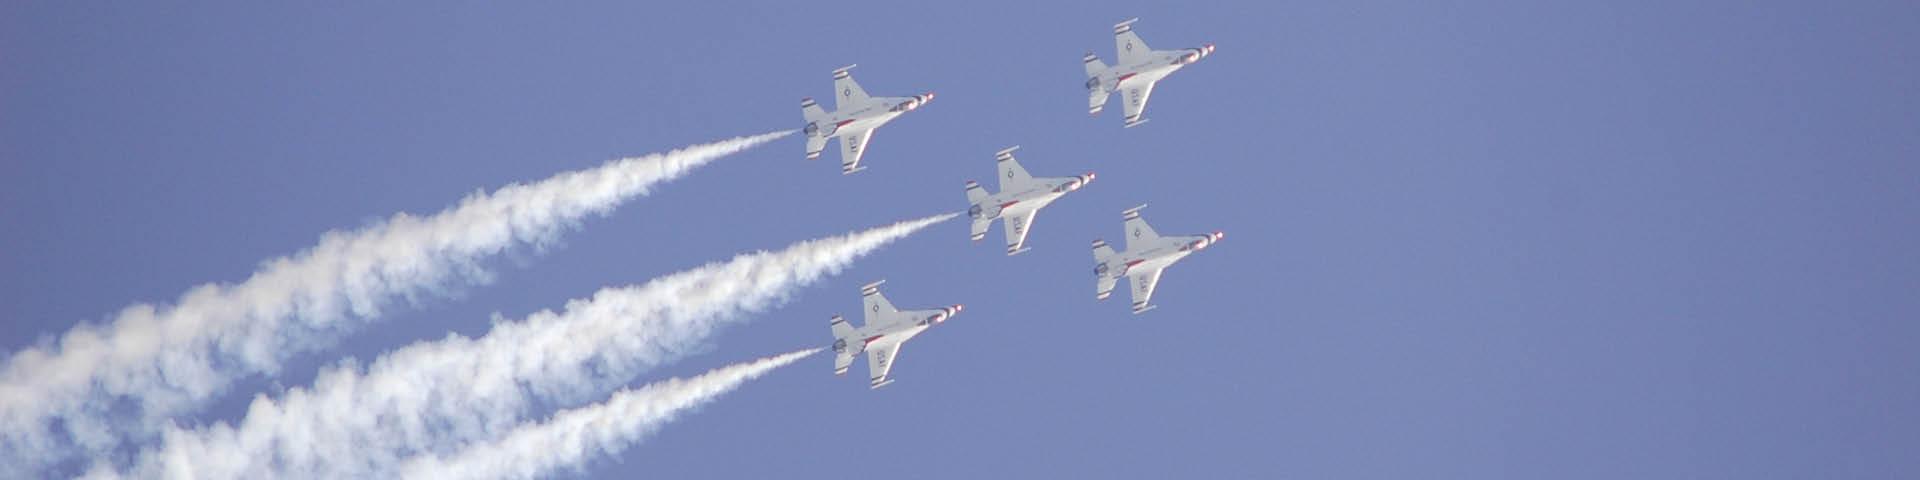 Image of Airshow 5 planes in the sky